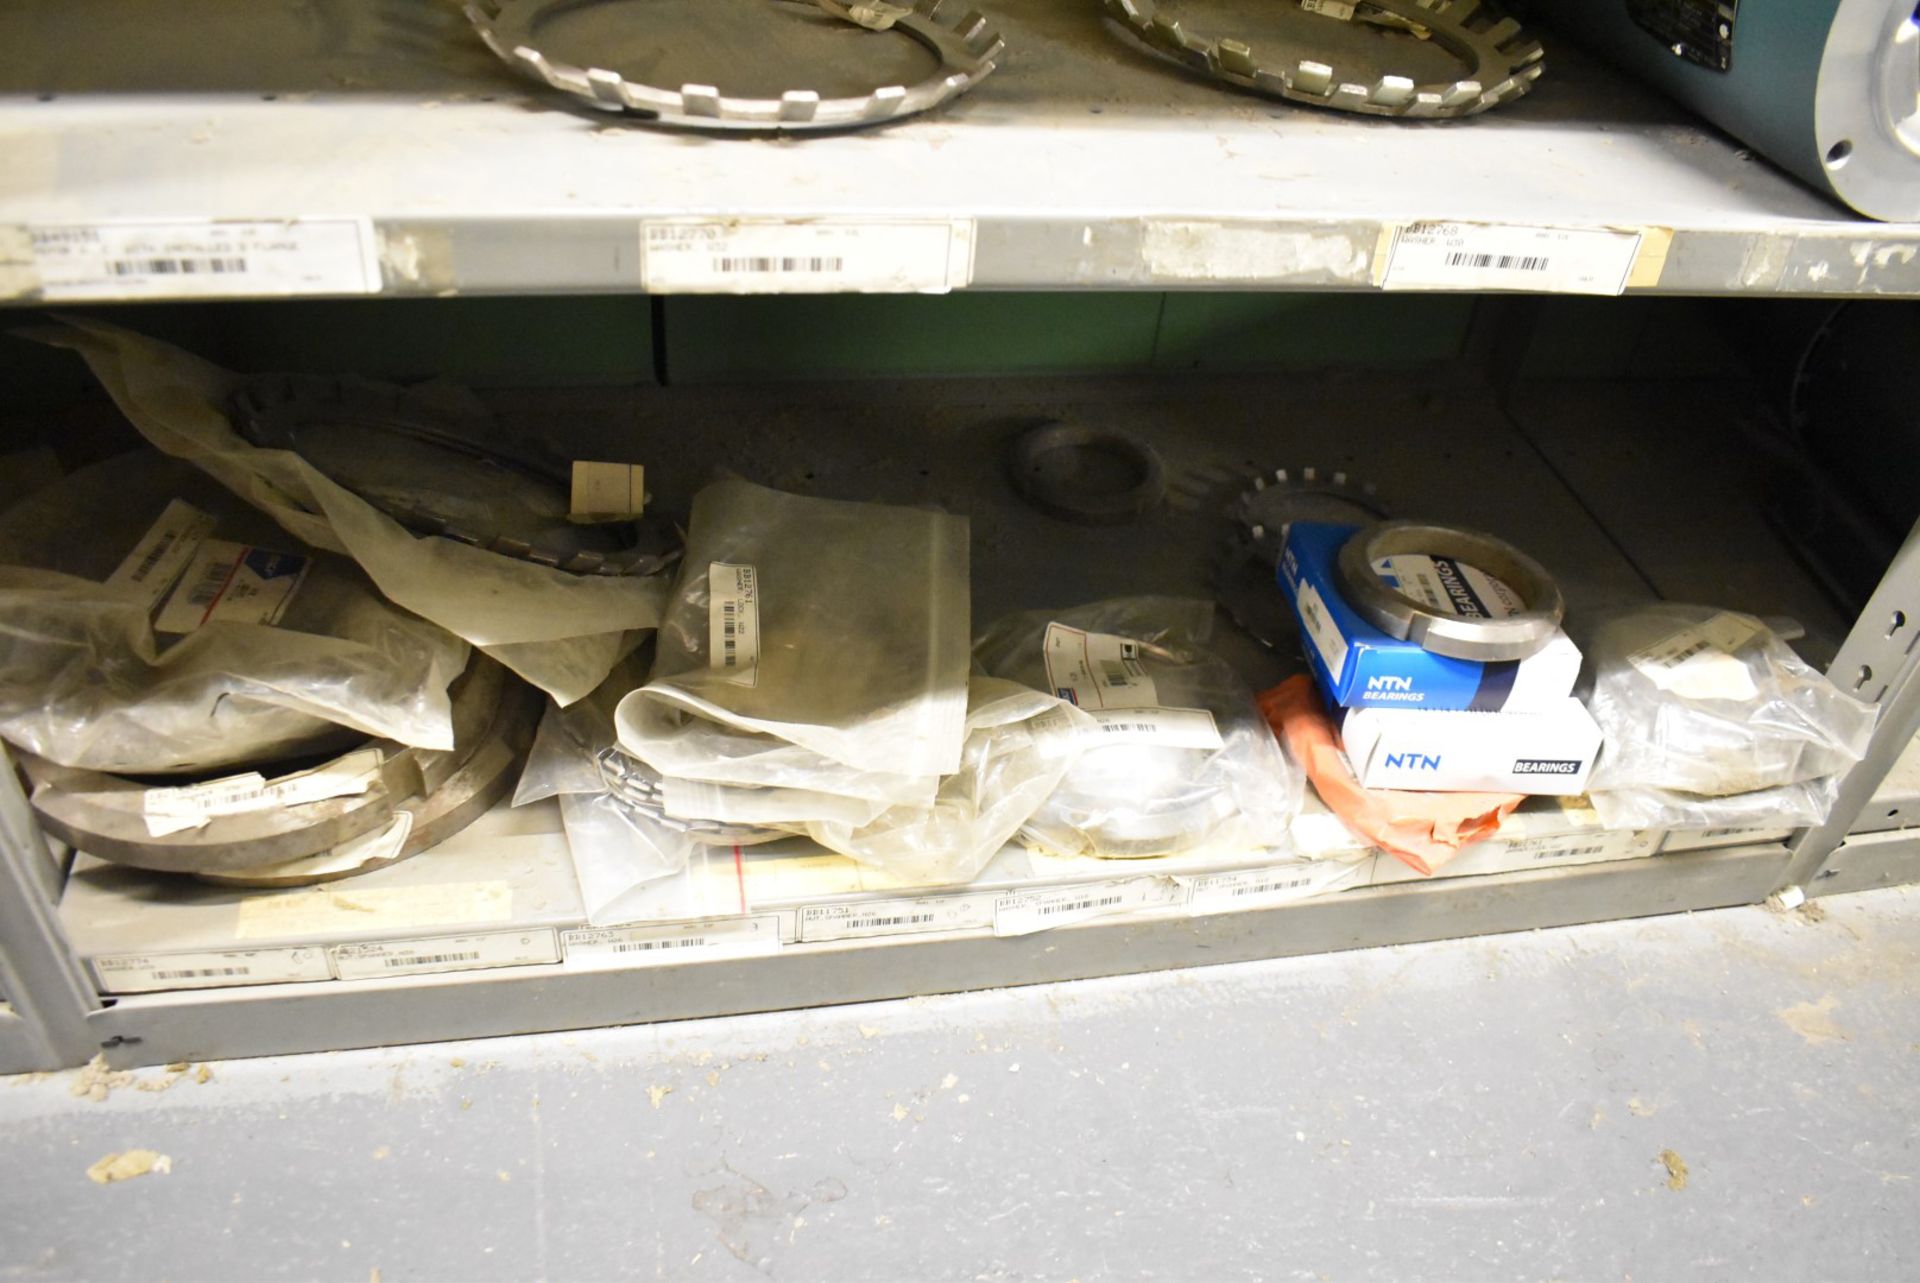 LOT/ CONTENTS OF REMAINING SHELVES - INCLUDING SPARE MOTORS, GEARBOXES, SPANNER NUTS, SPARE PARTS [ - Image 5 of 5